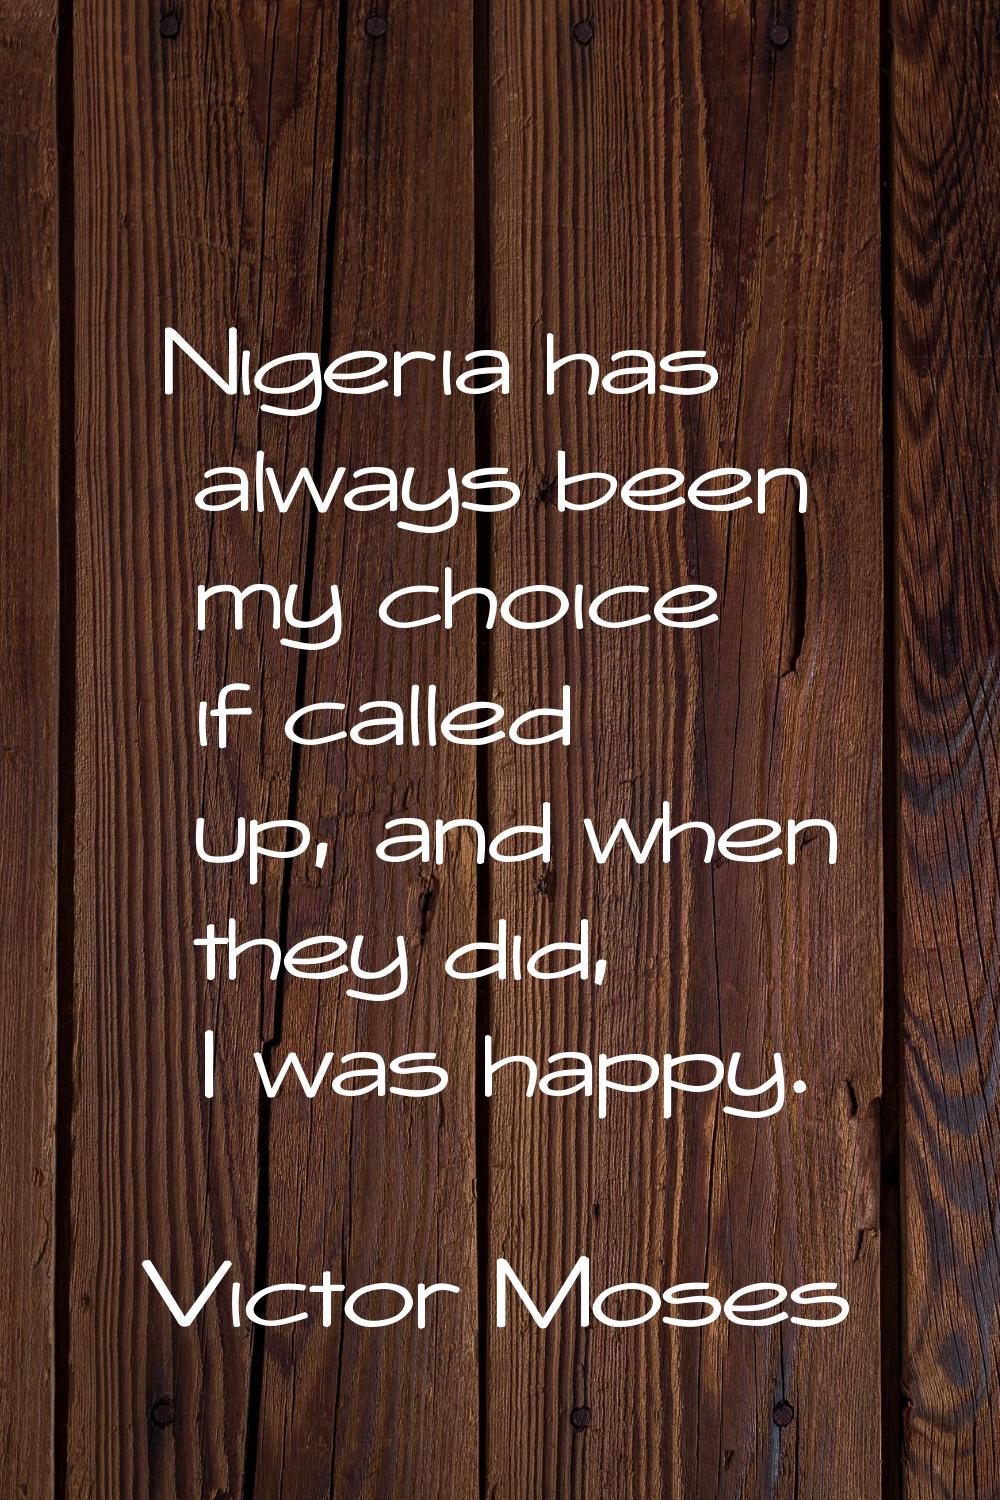 Nigeria has always been my choice if called up, and when they did, I was happy.